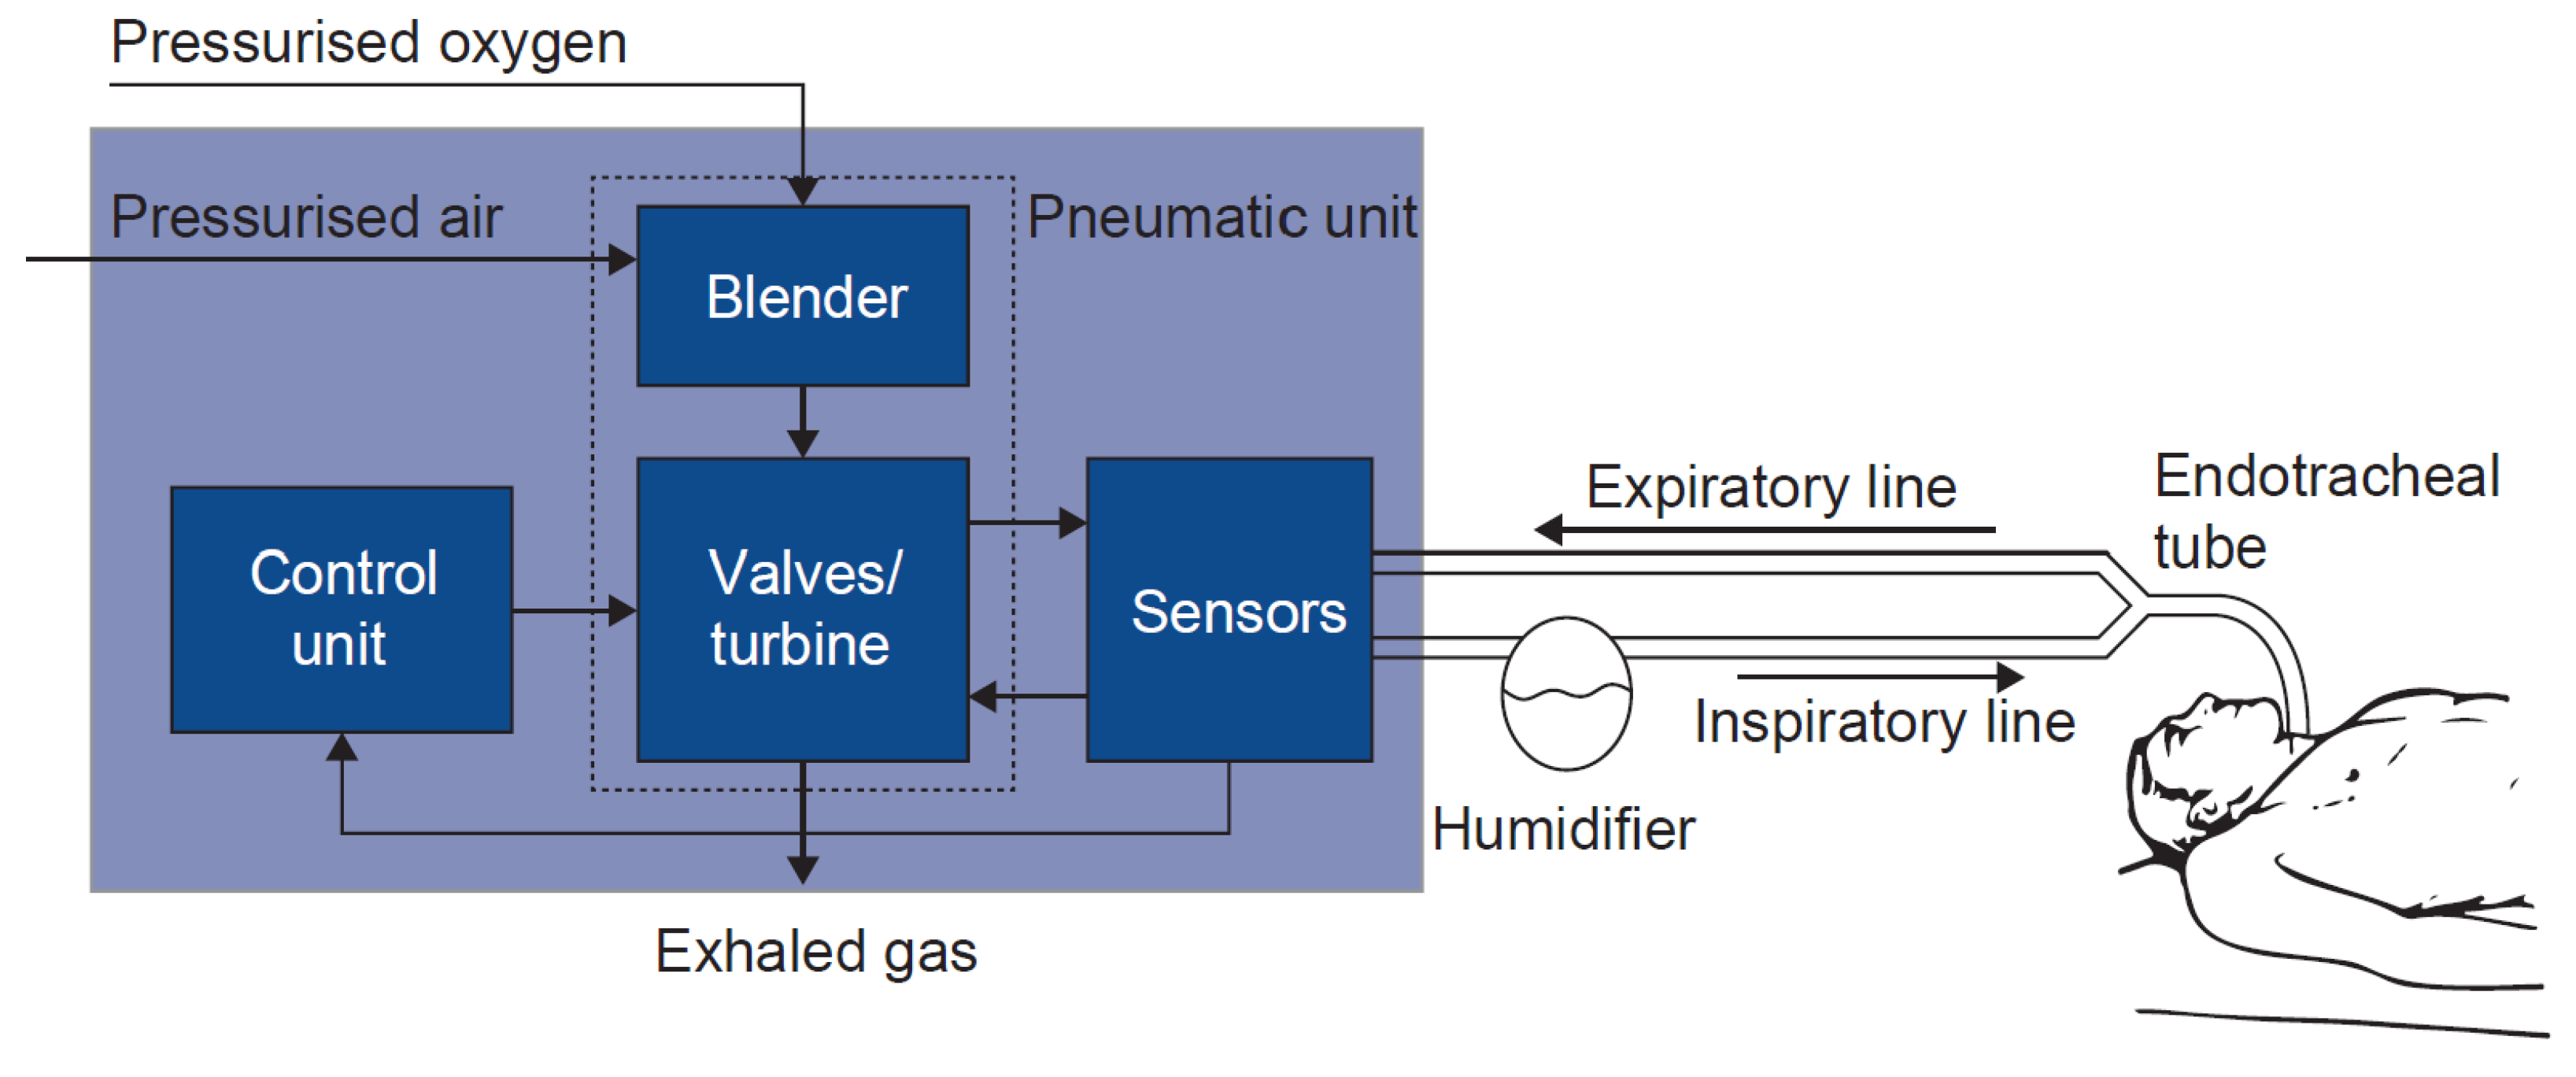 Applied Sciences | Free Full-Text | Patient–Ventilator Interaction Testing  Using the Electromechanical Lung Simulator xPULM™ during V/A-C and PSV  Ventilation Mode